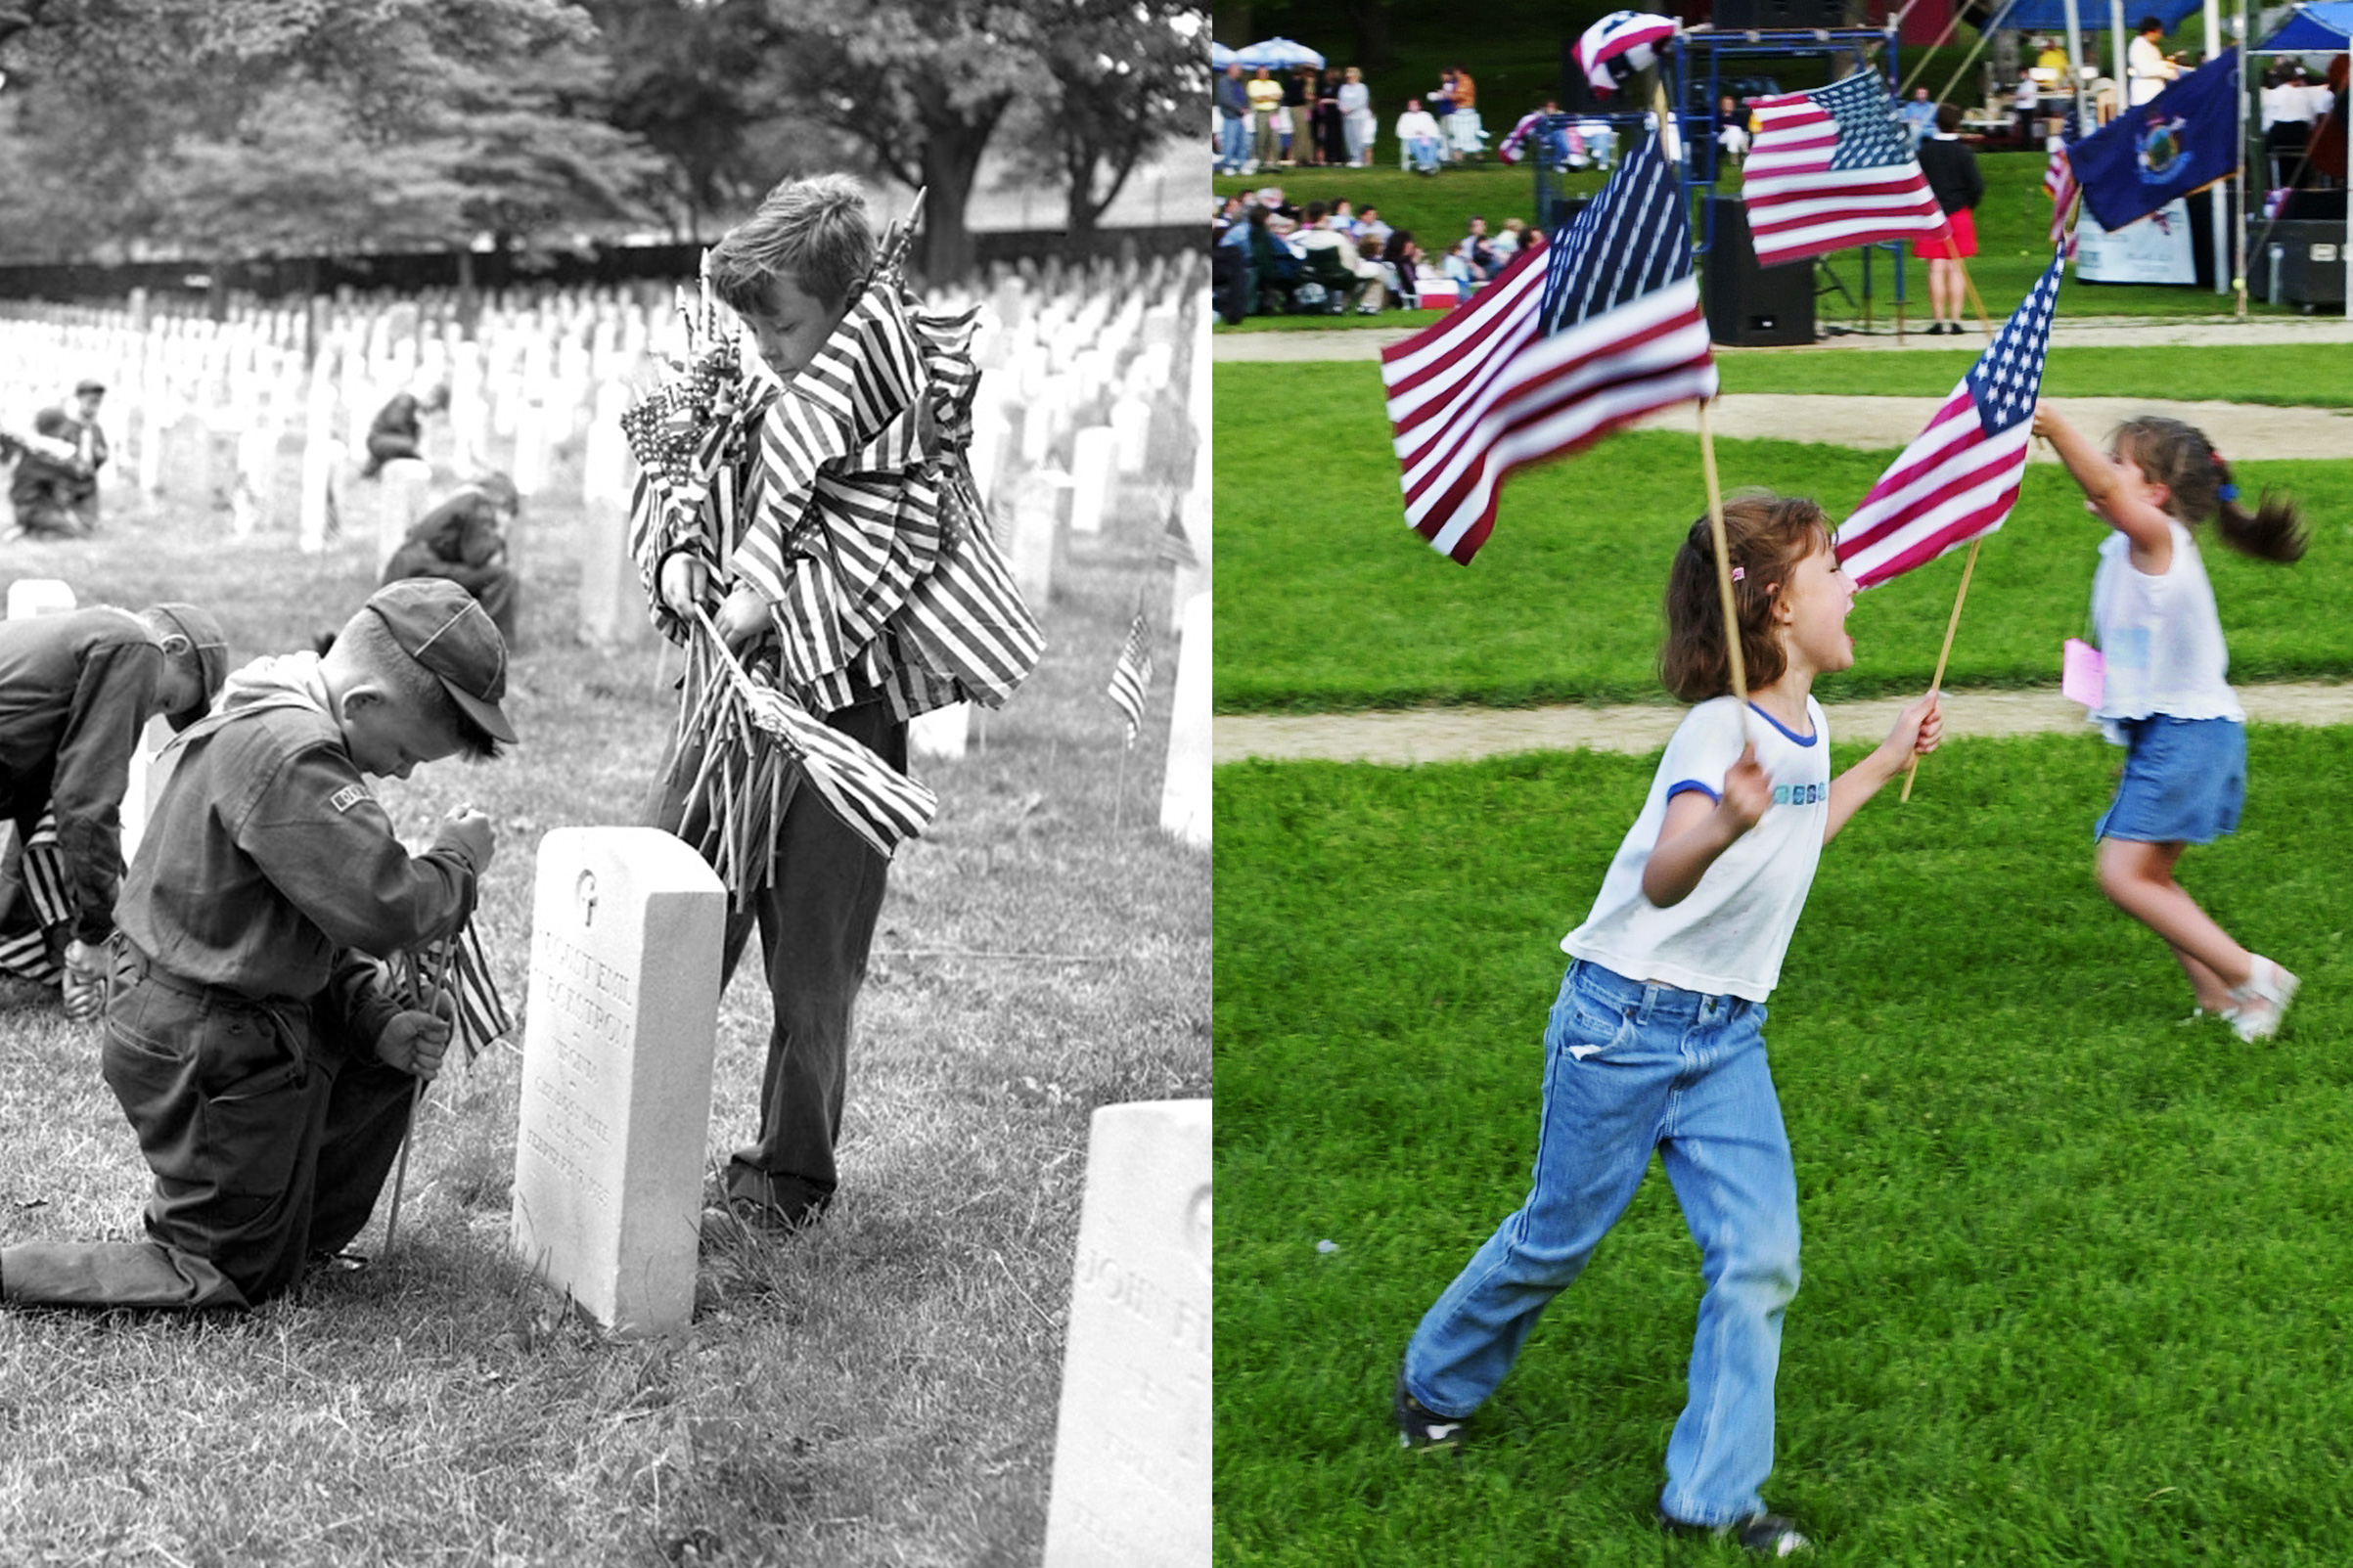 Happy Memorial Day Images for WhatsApp DP, Profile Wallpapers [Free Download]